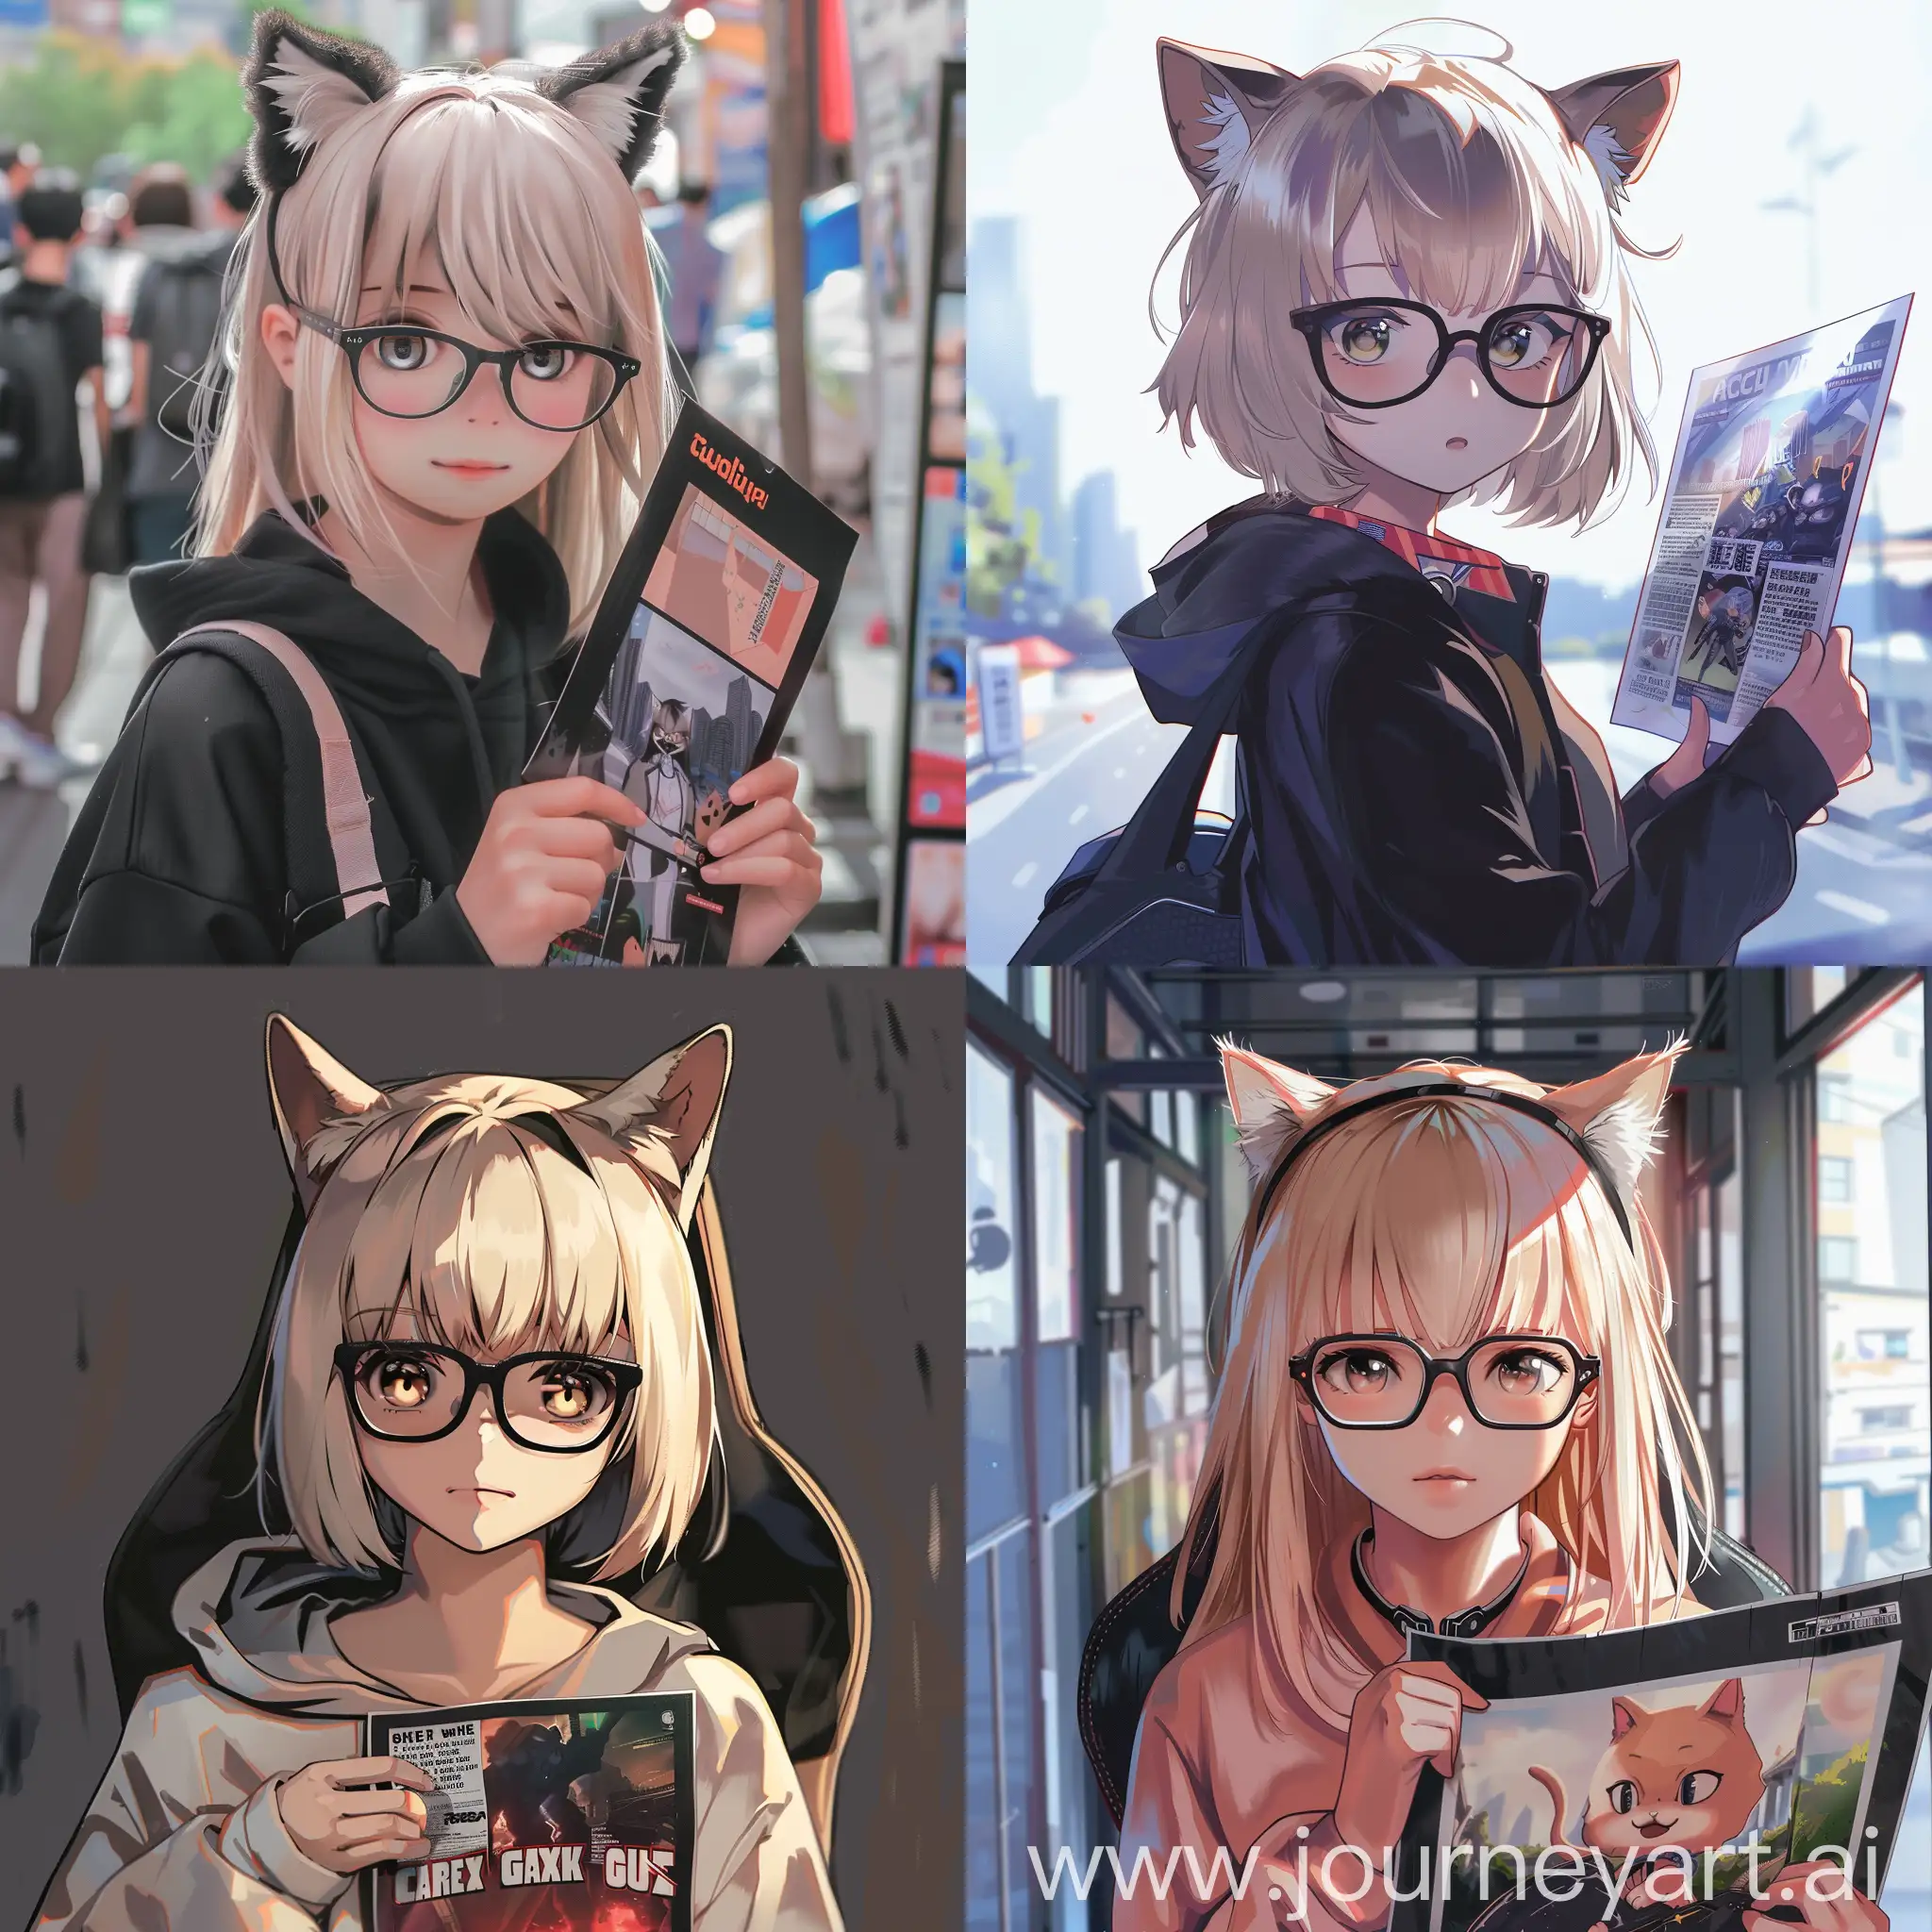 Anime-Style-Girl-Gamer-with-Cat-Ears-Holding-Poster-and-Glasses